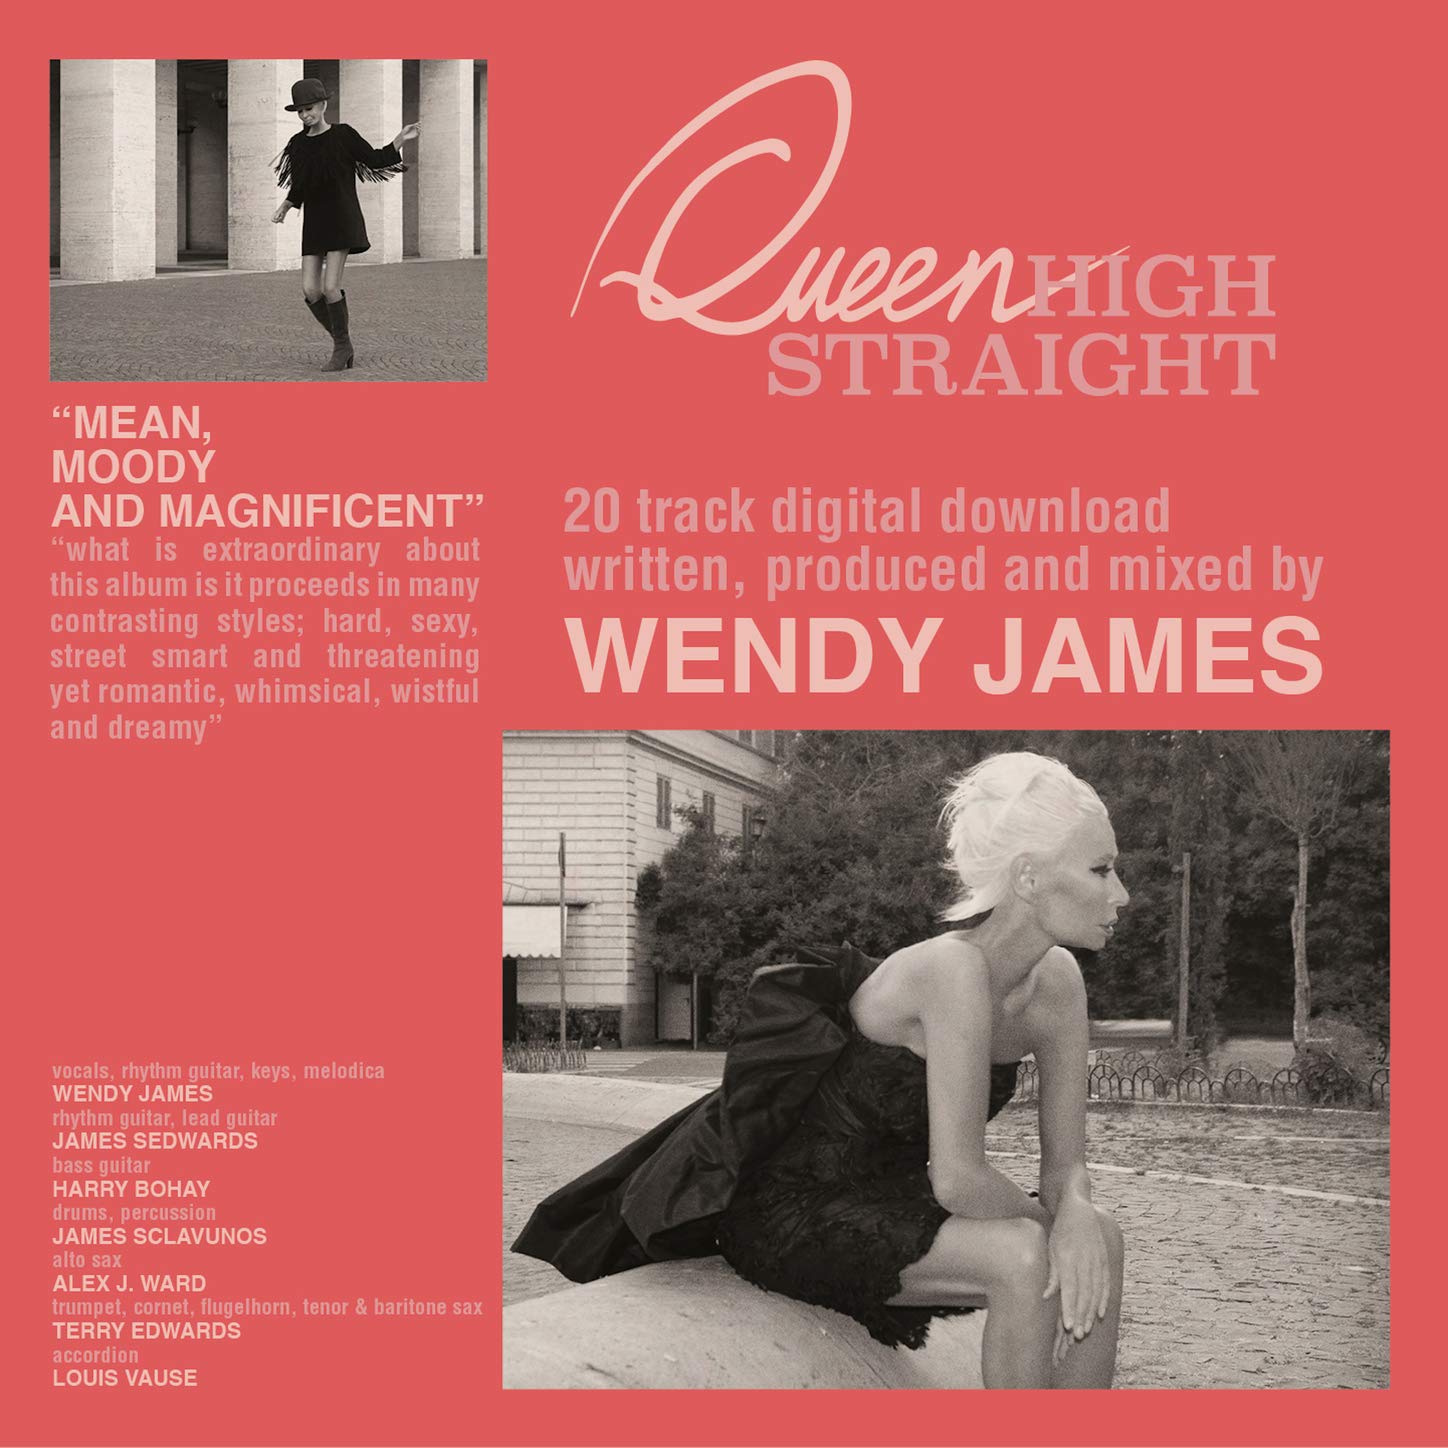 Wendy James-Queen High Straight-CD-FLAC-2020-401 Download